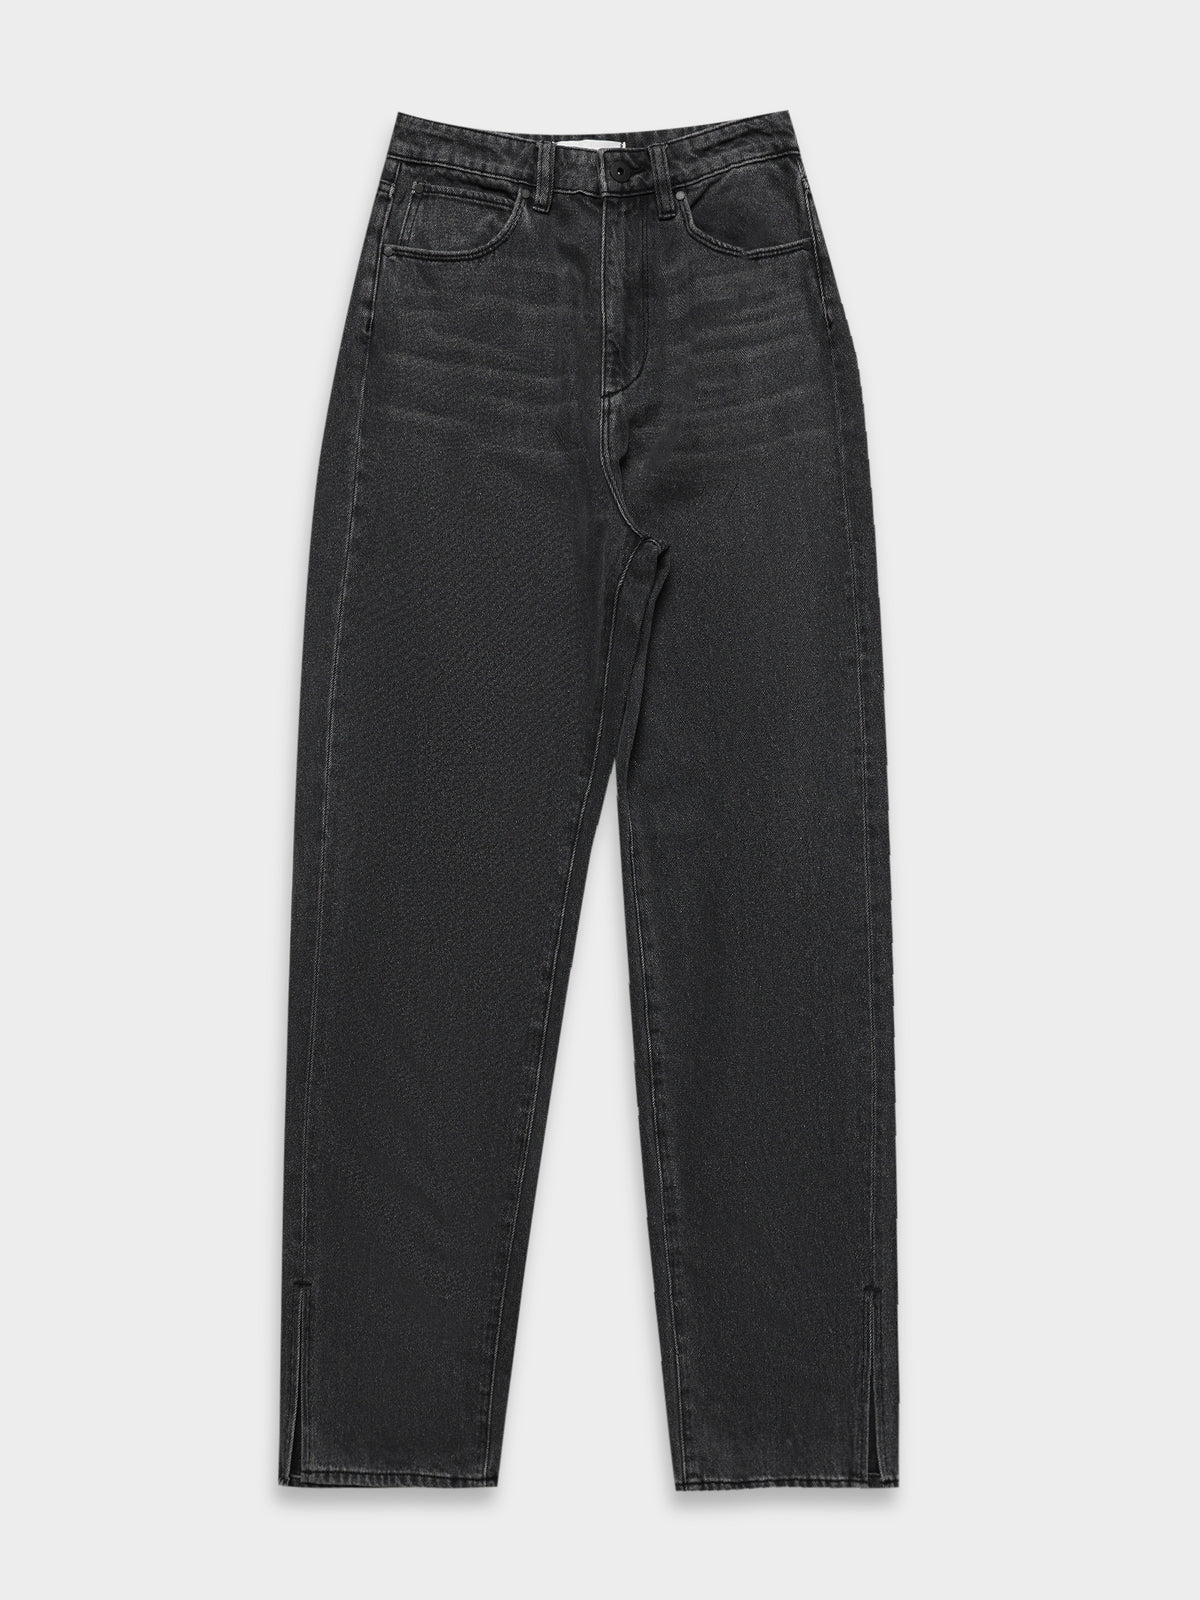 Hailey Baggy Split Jeans in Washed Black